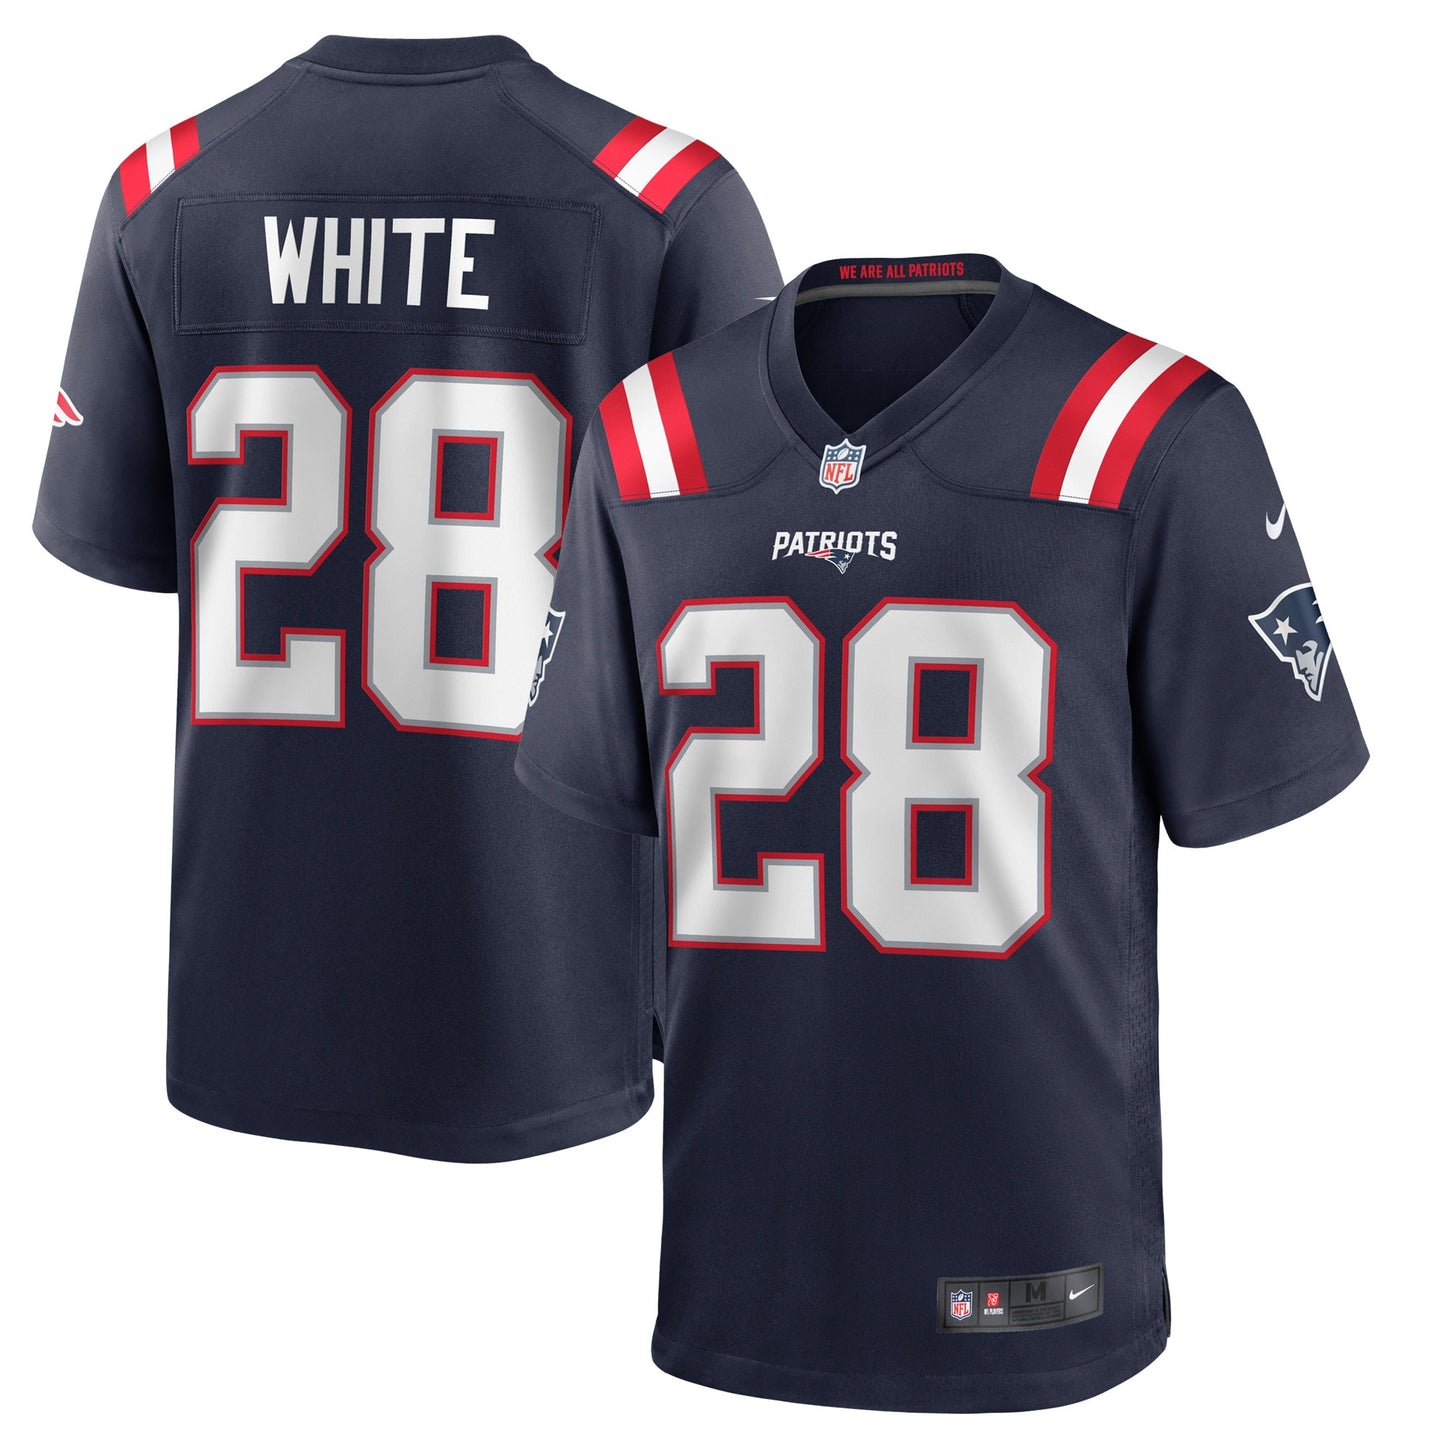 James White New England Patriots Nike Game Player Jersey - Navy